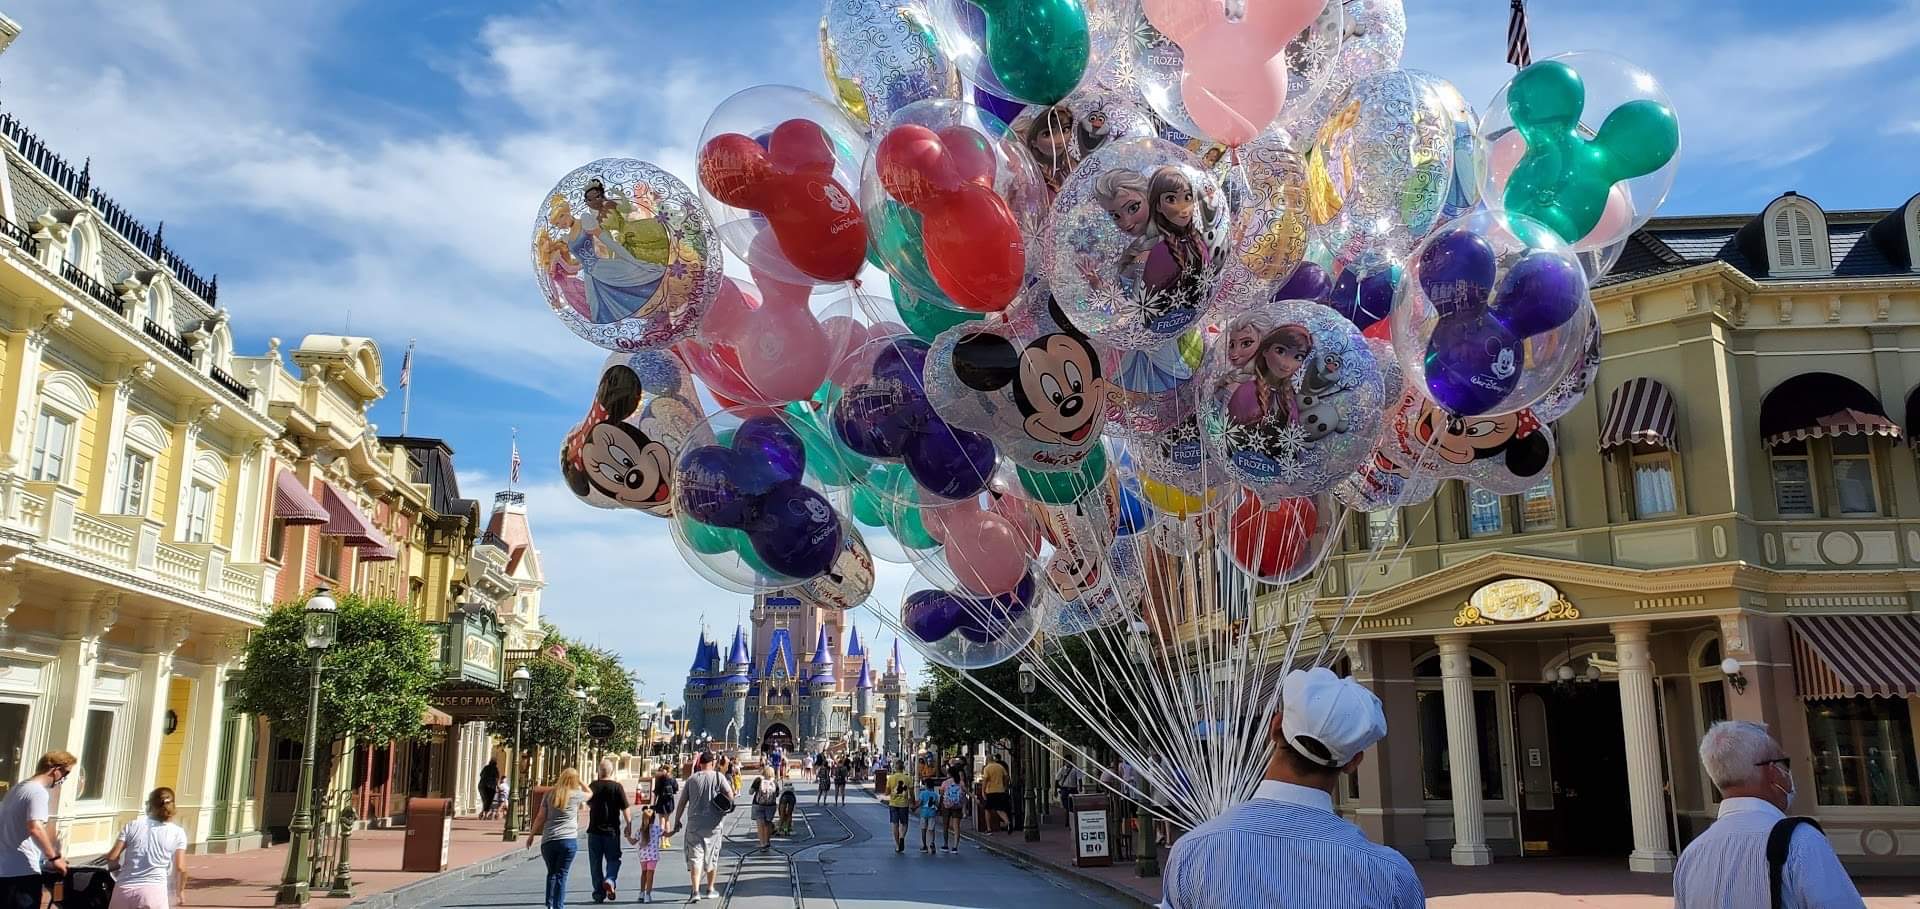 Furlough for Disney World Cast Members has been extended